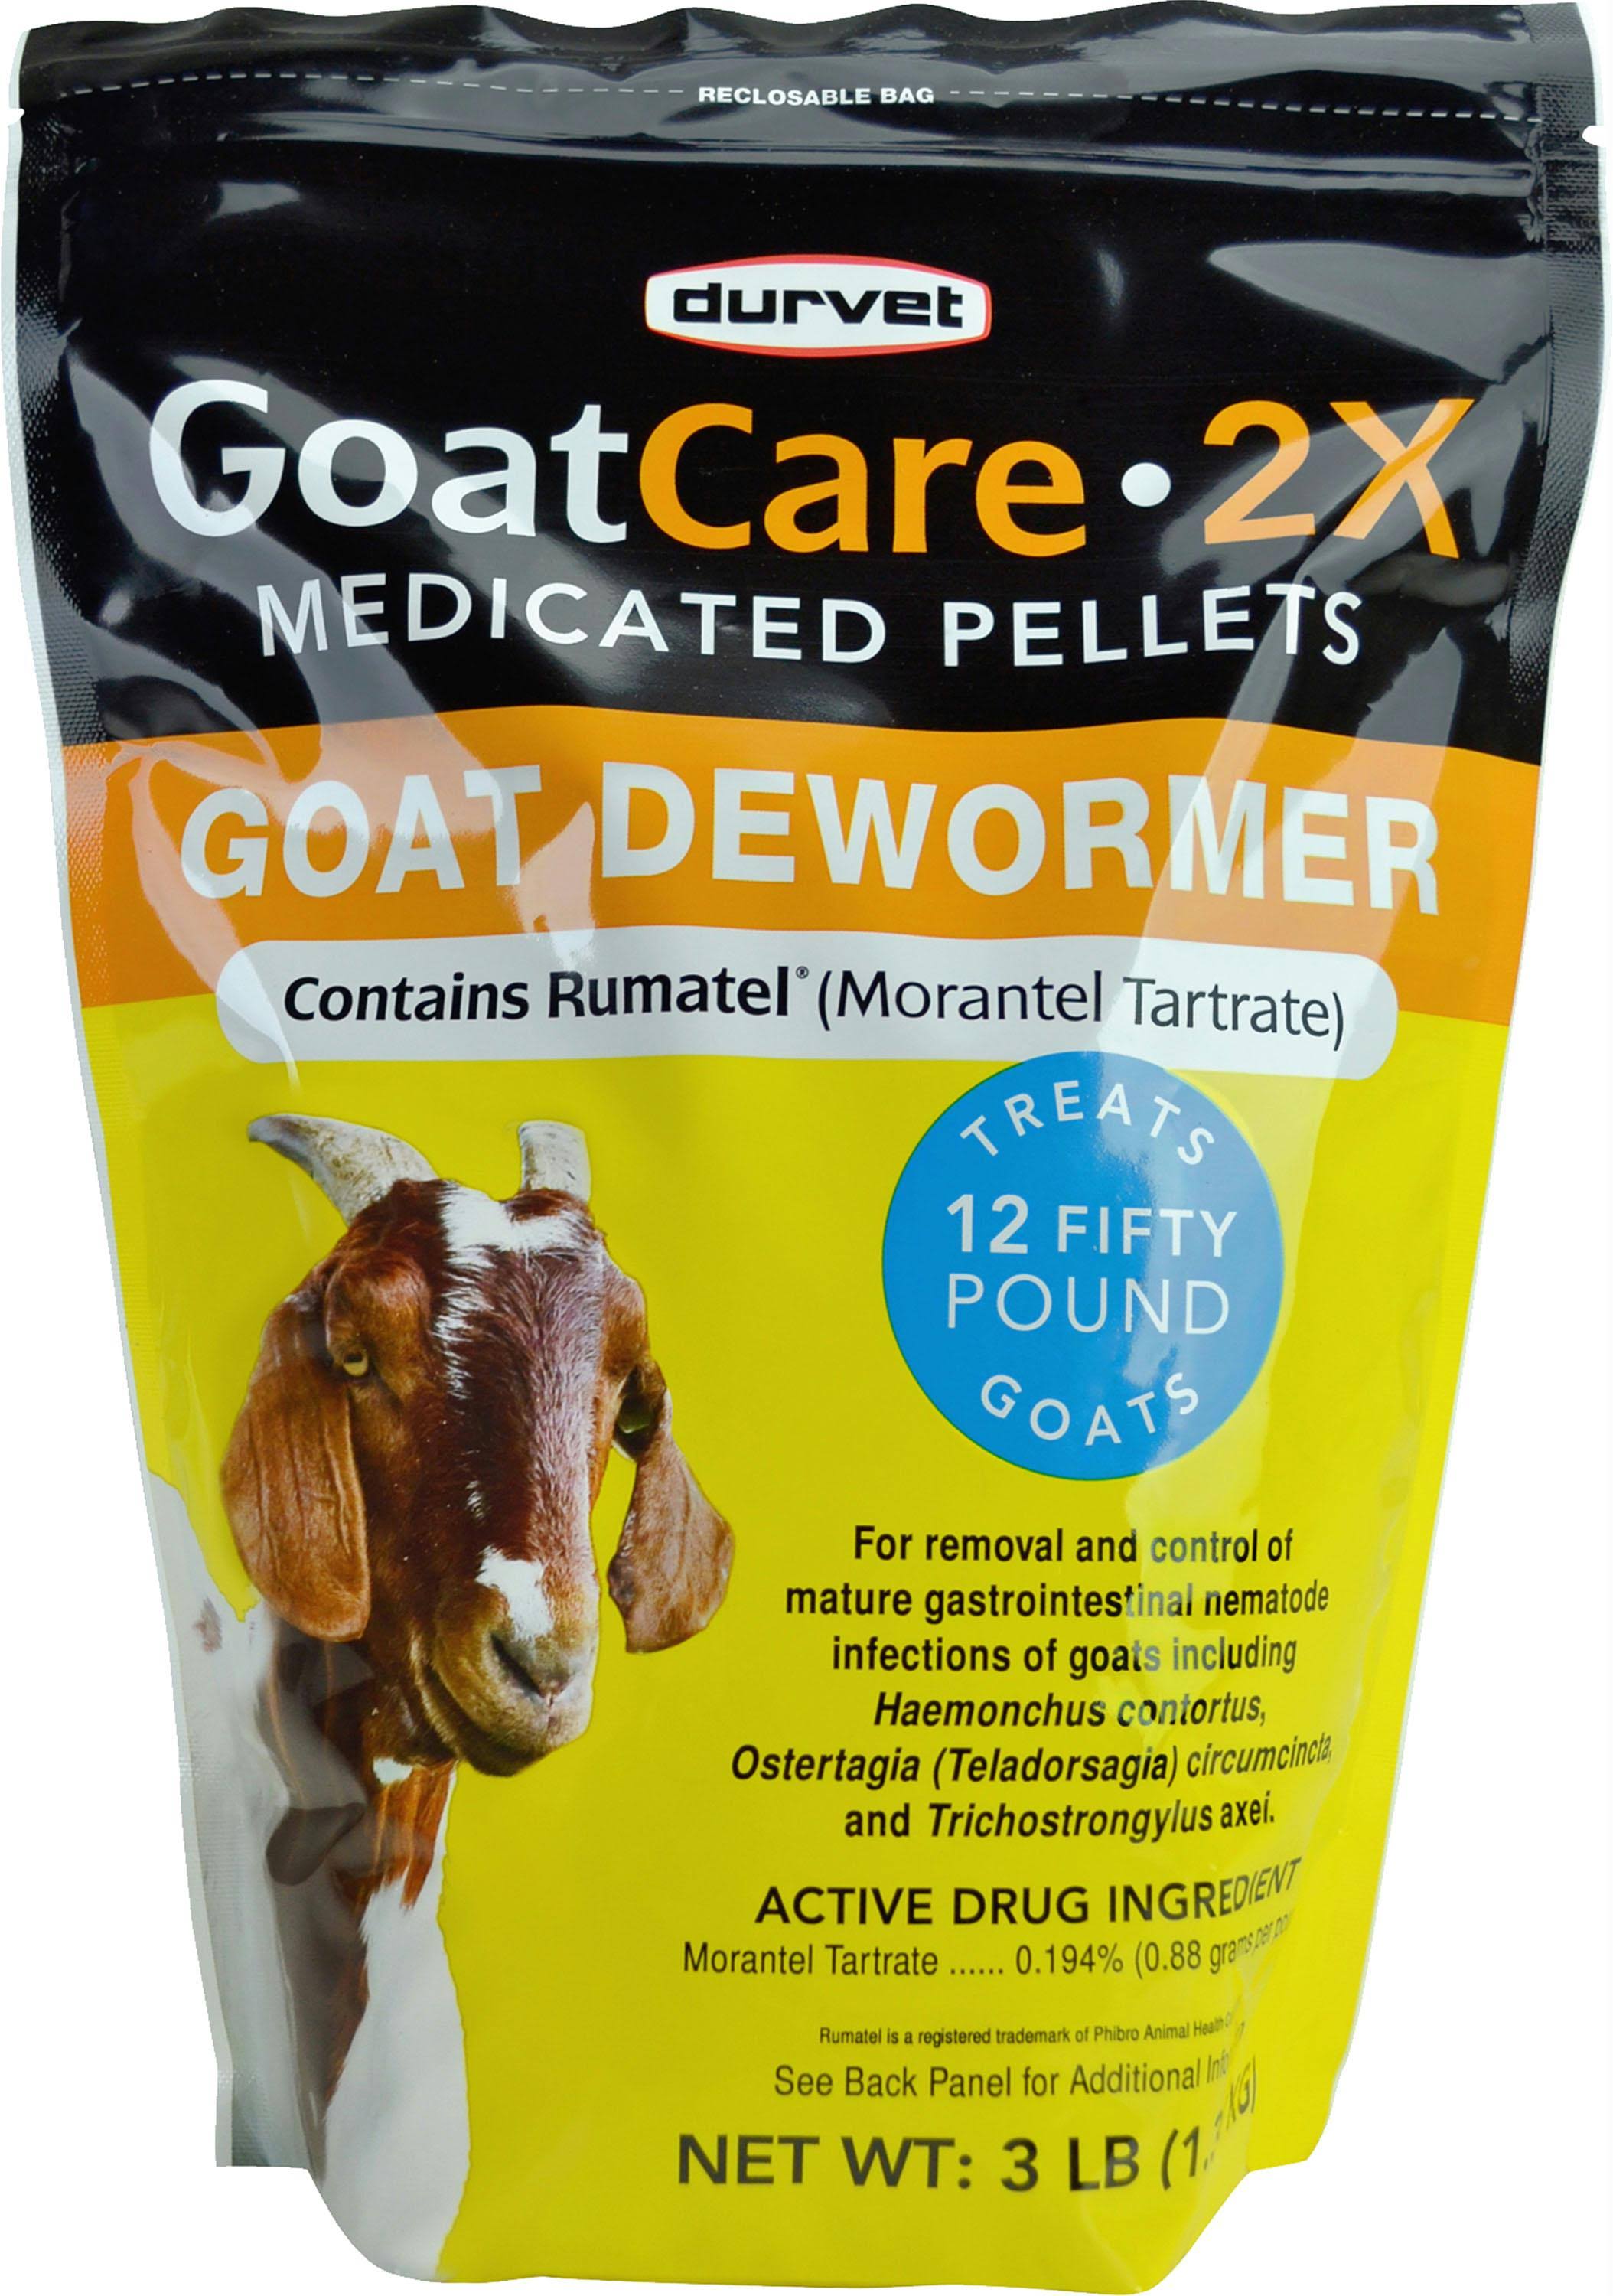 Goat Care 2x Goat Dewormer Medicated Pellets - 3lbs